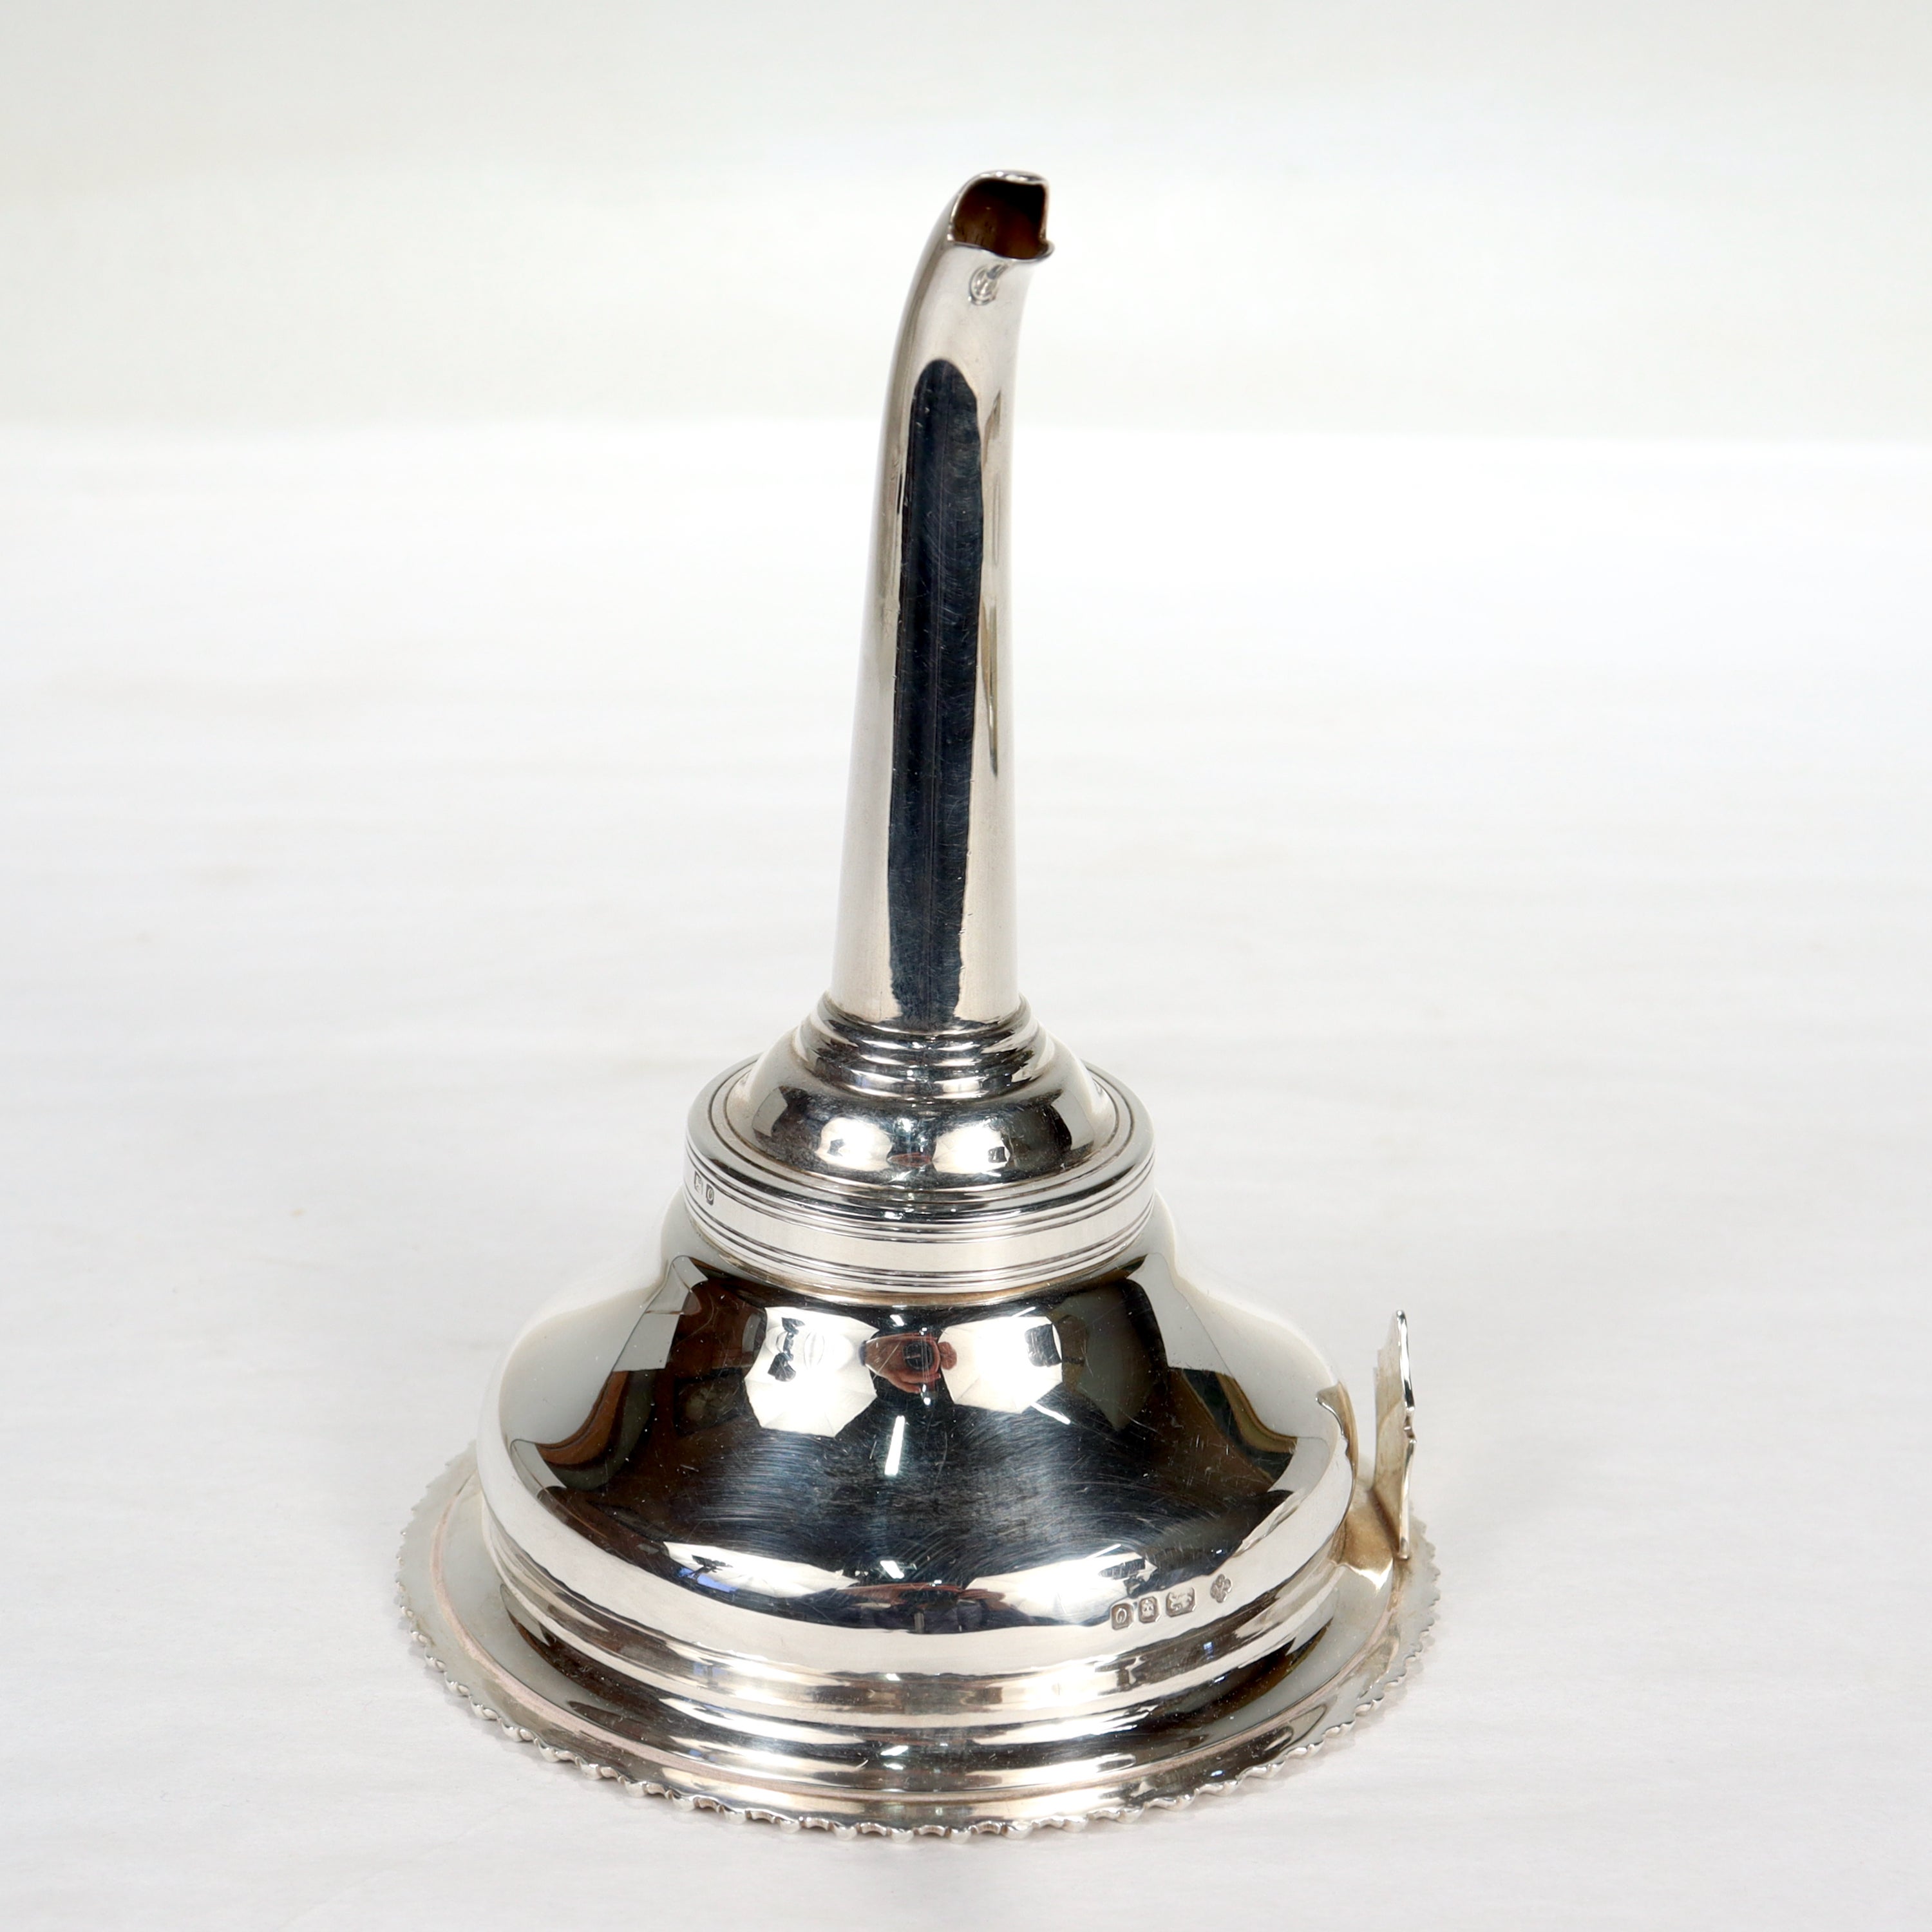 A fine English sterling silver wine funnel.
 
By Asprey & Co.

The funnel consists of three pieces - the funnel, the spout, and an interior ring that sits where the two connect.

Simply a great funnel from one of England's premier